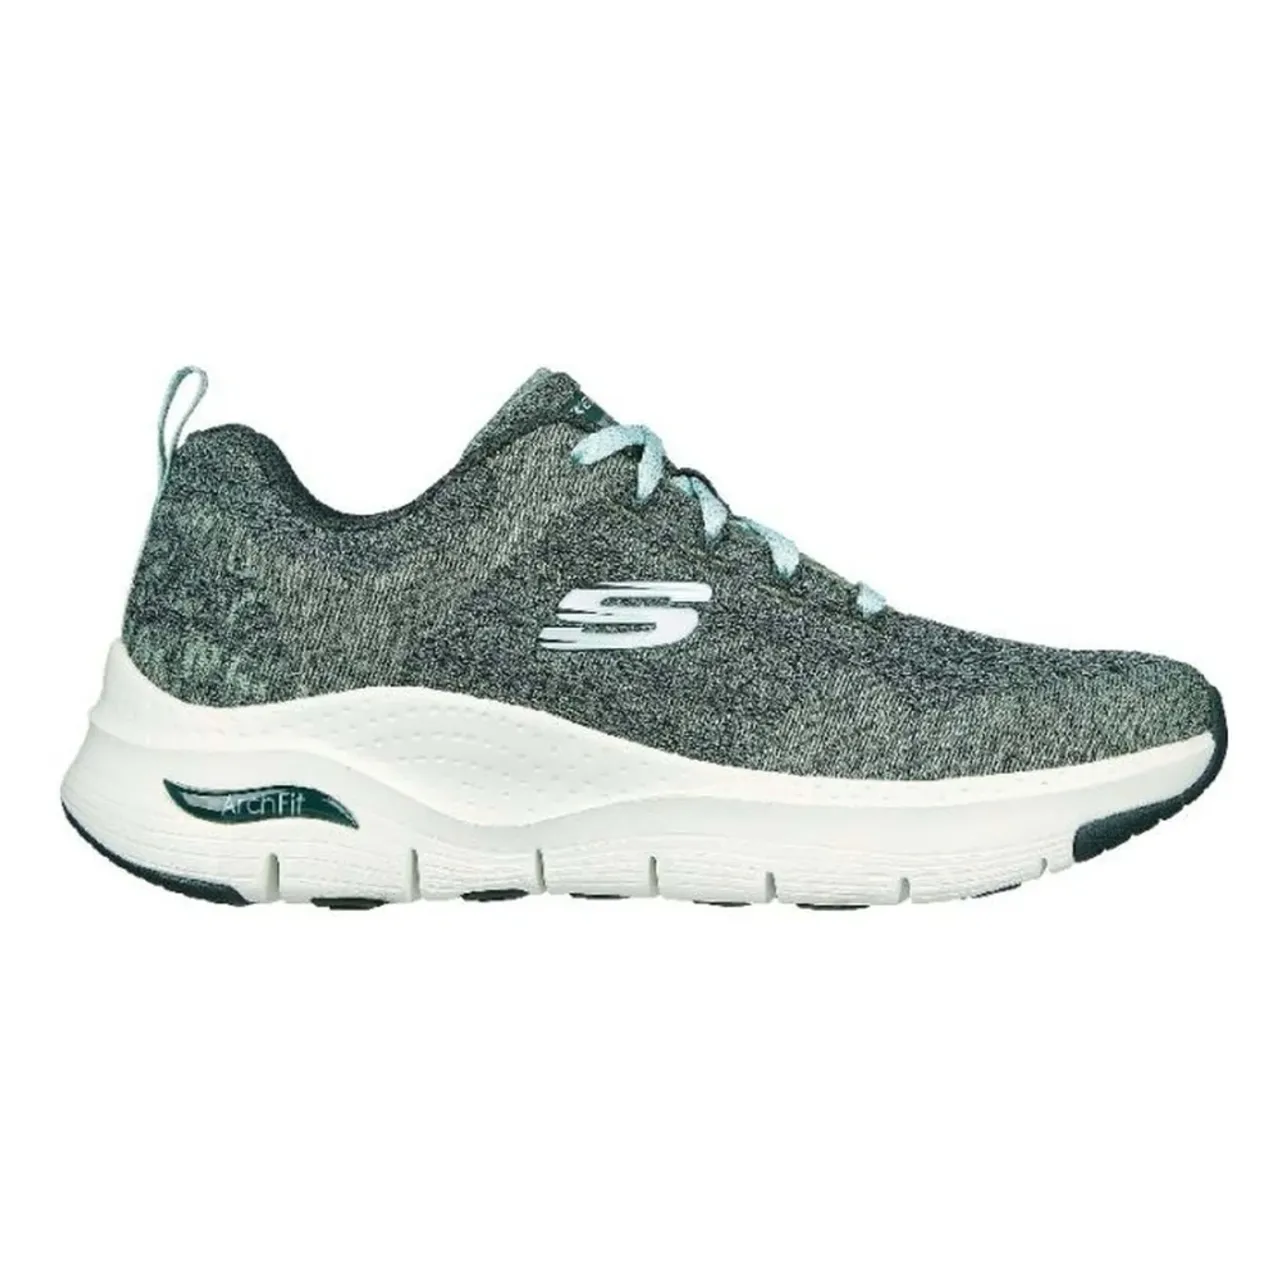 Skechers , Zapatillas Arch Fit Comfy Wave ,Gray female, Sizes: